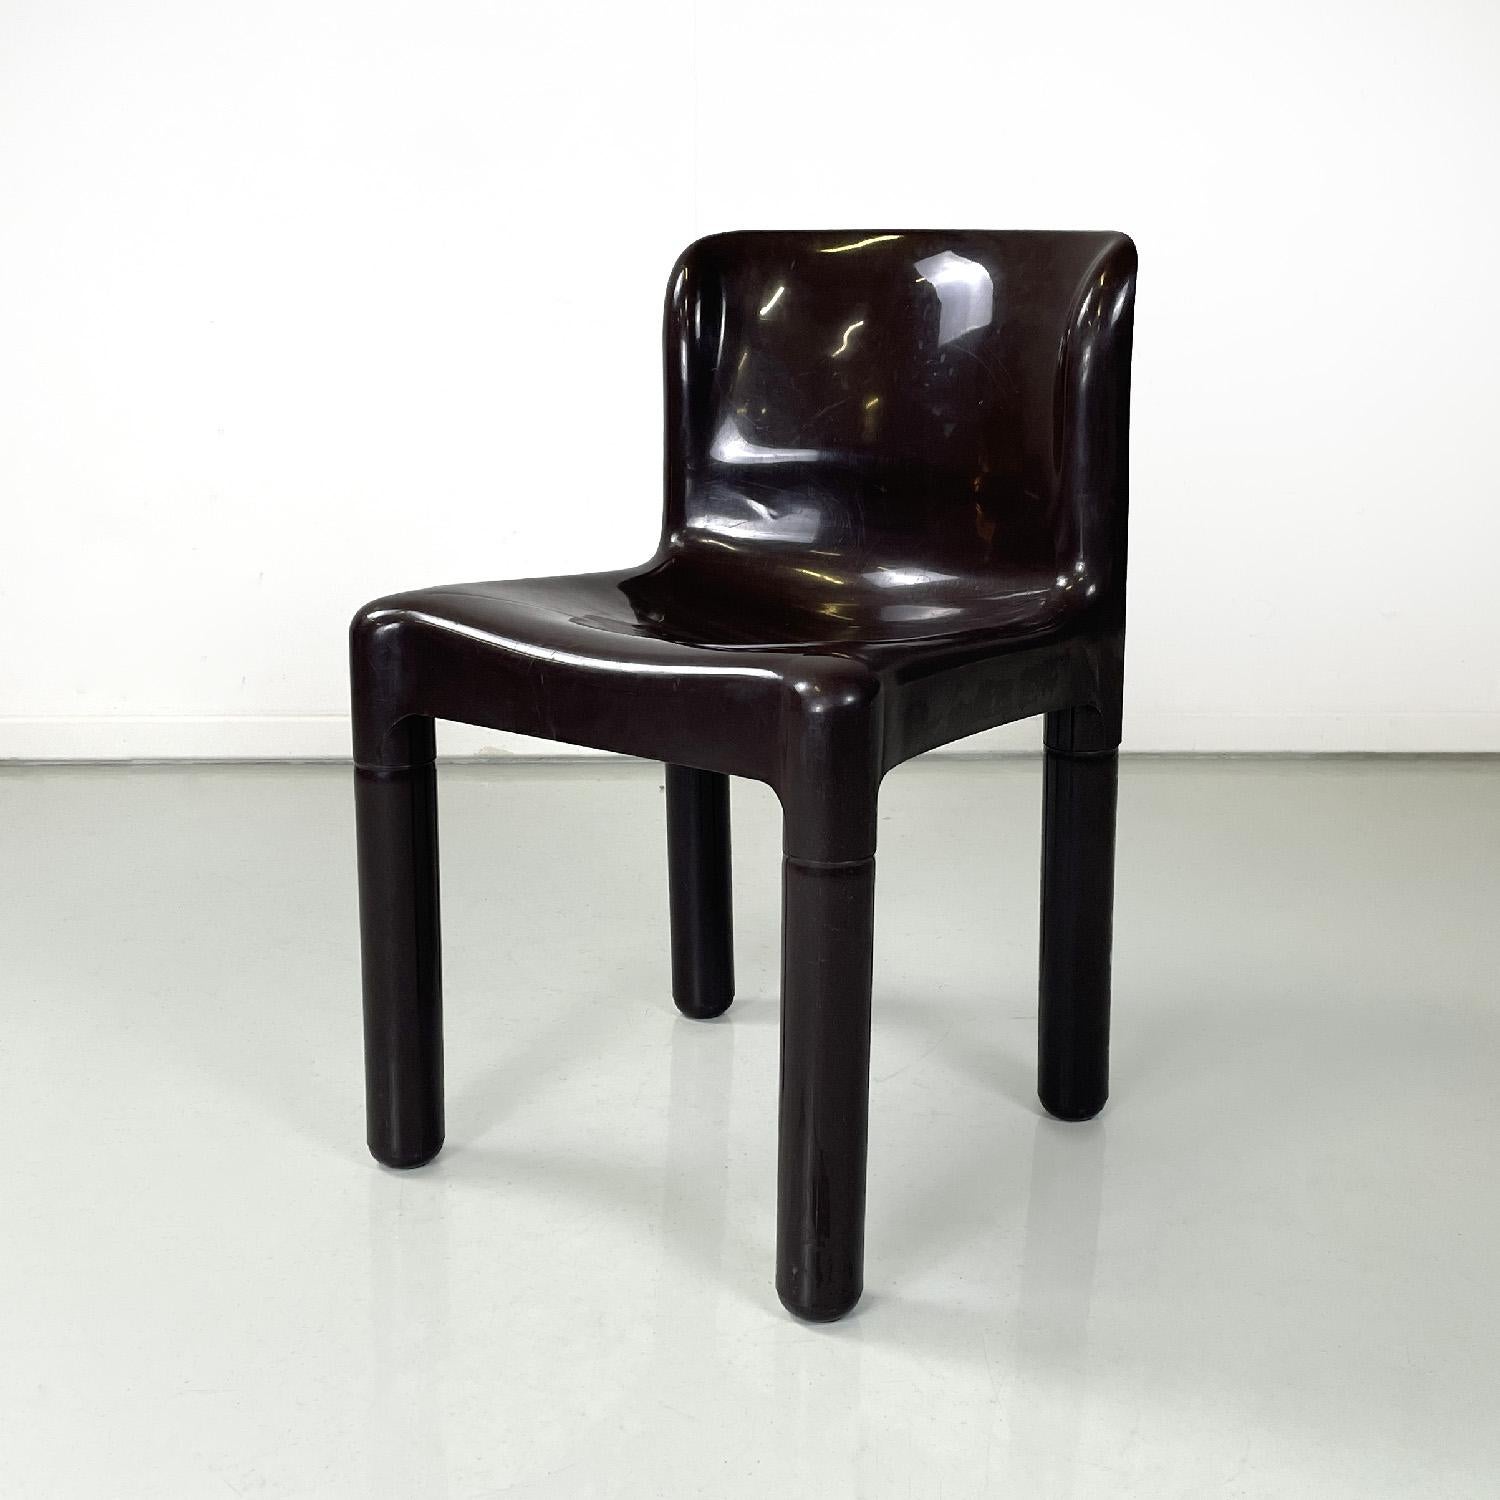 Italian modern brown plastic chair 4875 by Carlo Bartoli for Kartell, 1970s
Chair mod. 4875 with rounded seat and back, in brown plastic. The round section chair legs are removable. They can also be used outside like in a garden or in the